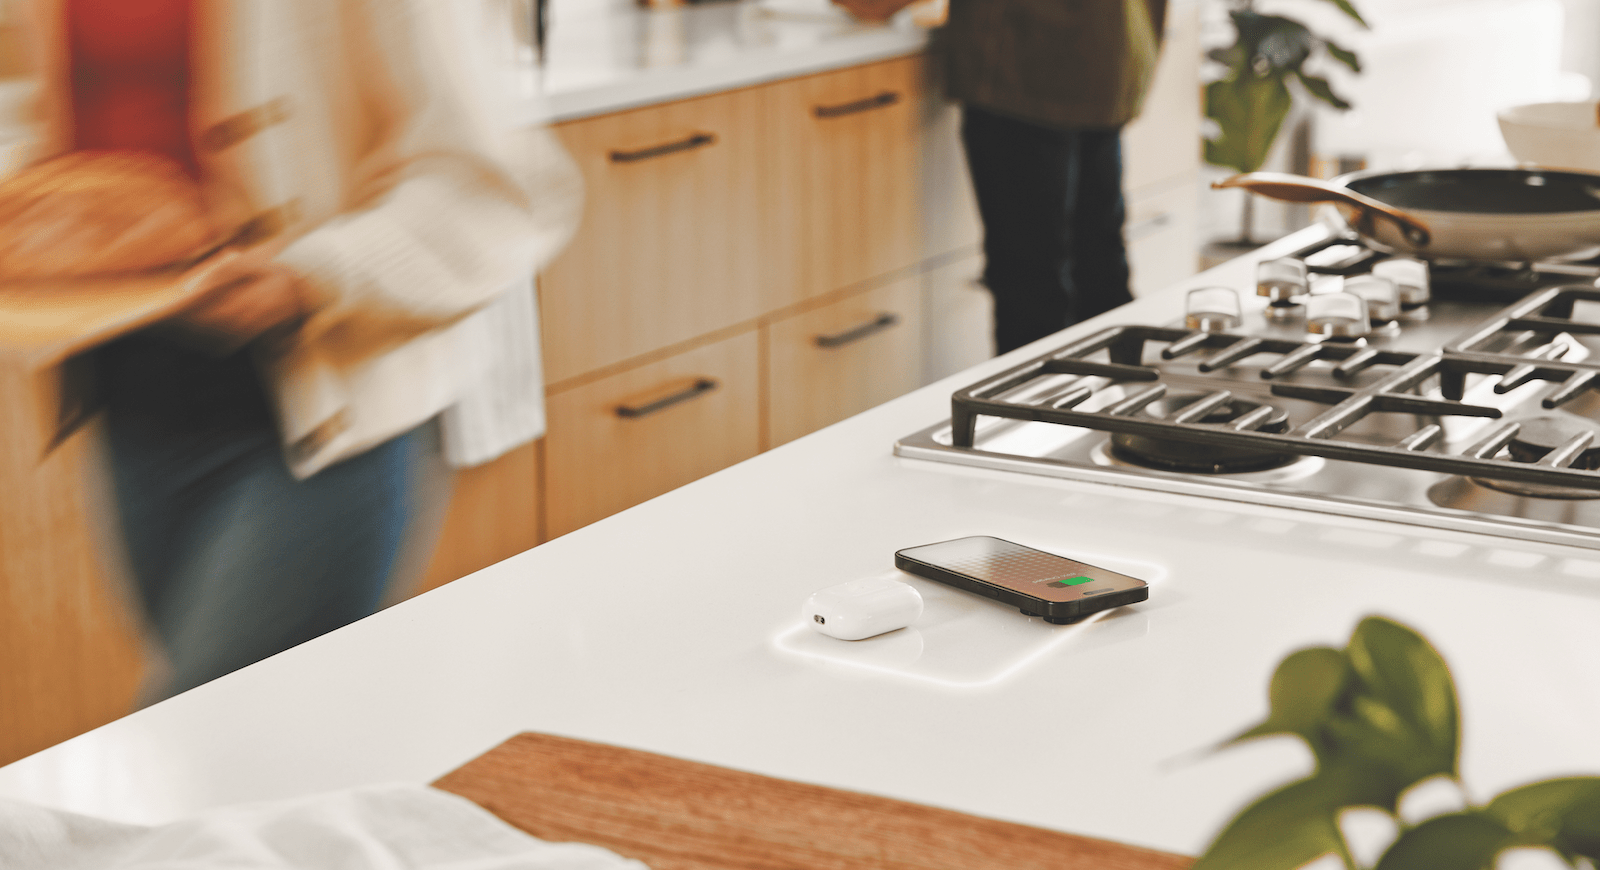 FreePower wireless countertop charging in the kitchen